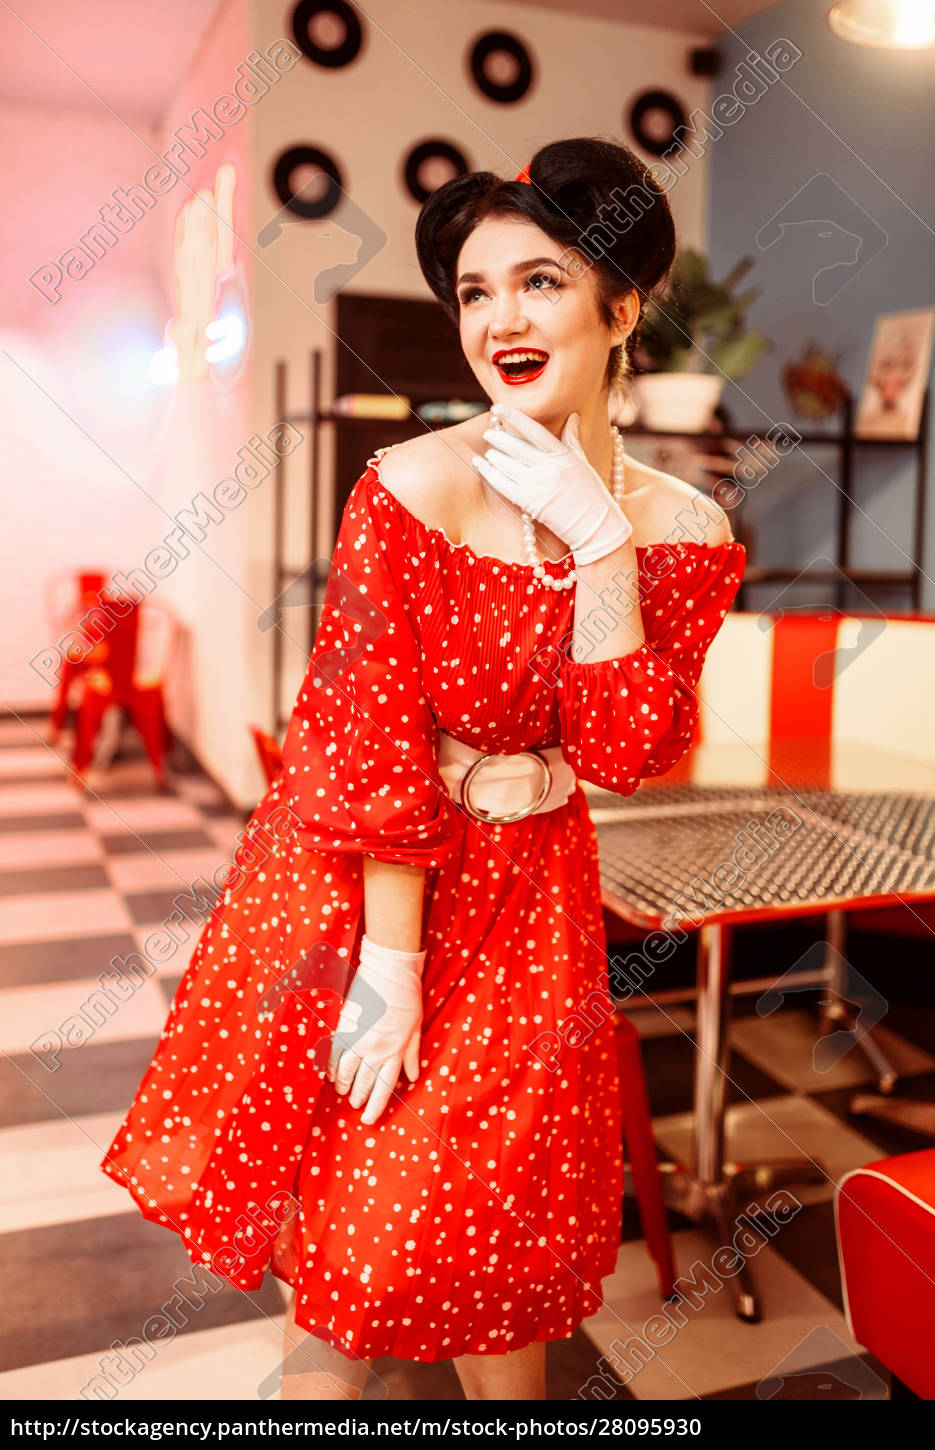 Pretty Pin Up Woman With Make Up Vintage Style Royalty Free Image 28095930 Panthermedia